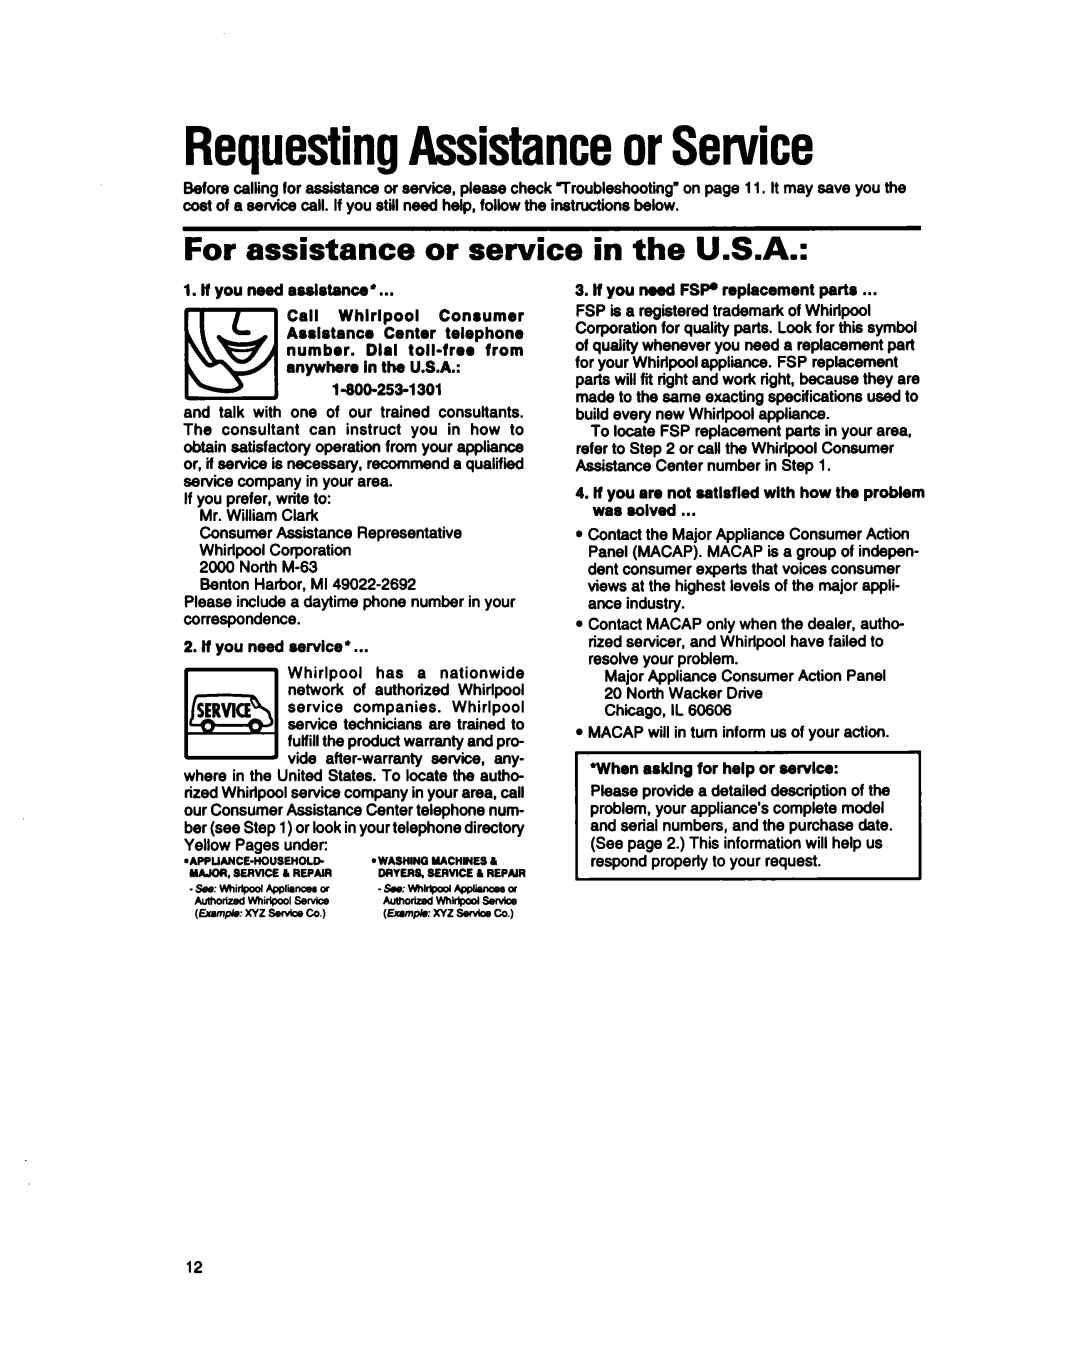 Whirlpool BHDH2500FS0 manual For assistance or service in the U.S.A, RequestingAssistanceorSenrice 